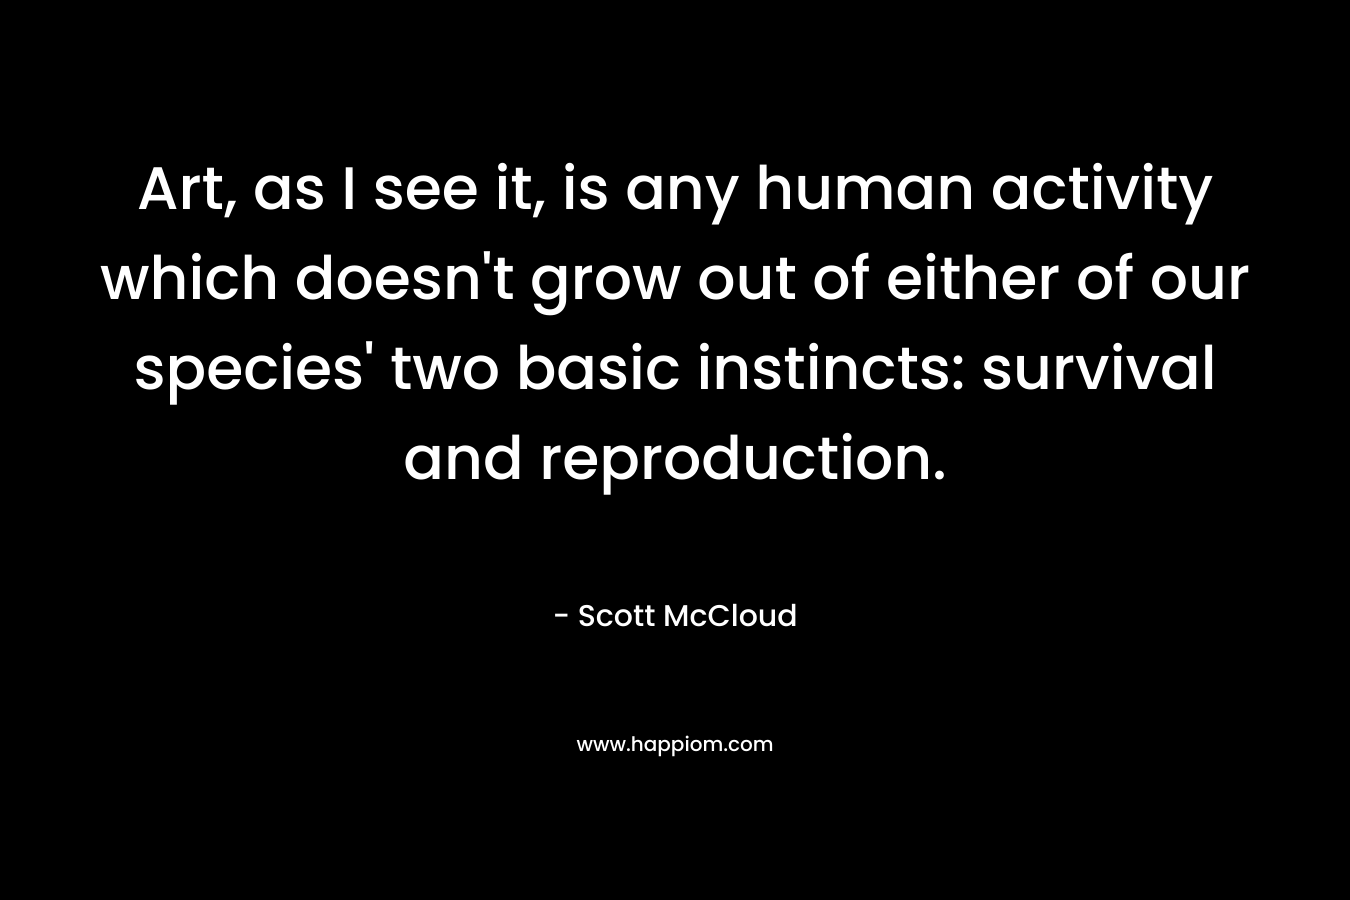 Art, as I see it, is any human activity which doesn't grow out of either of our species' two basic instincts: survival and reproduction.